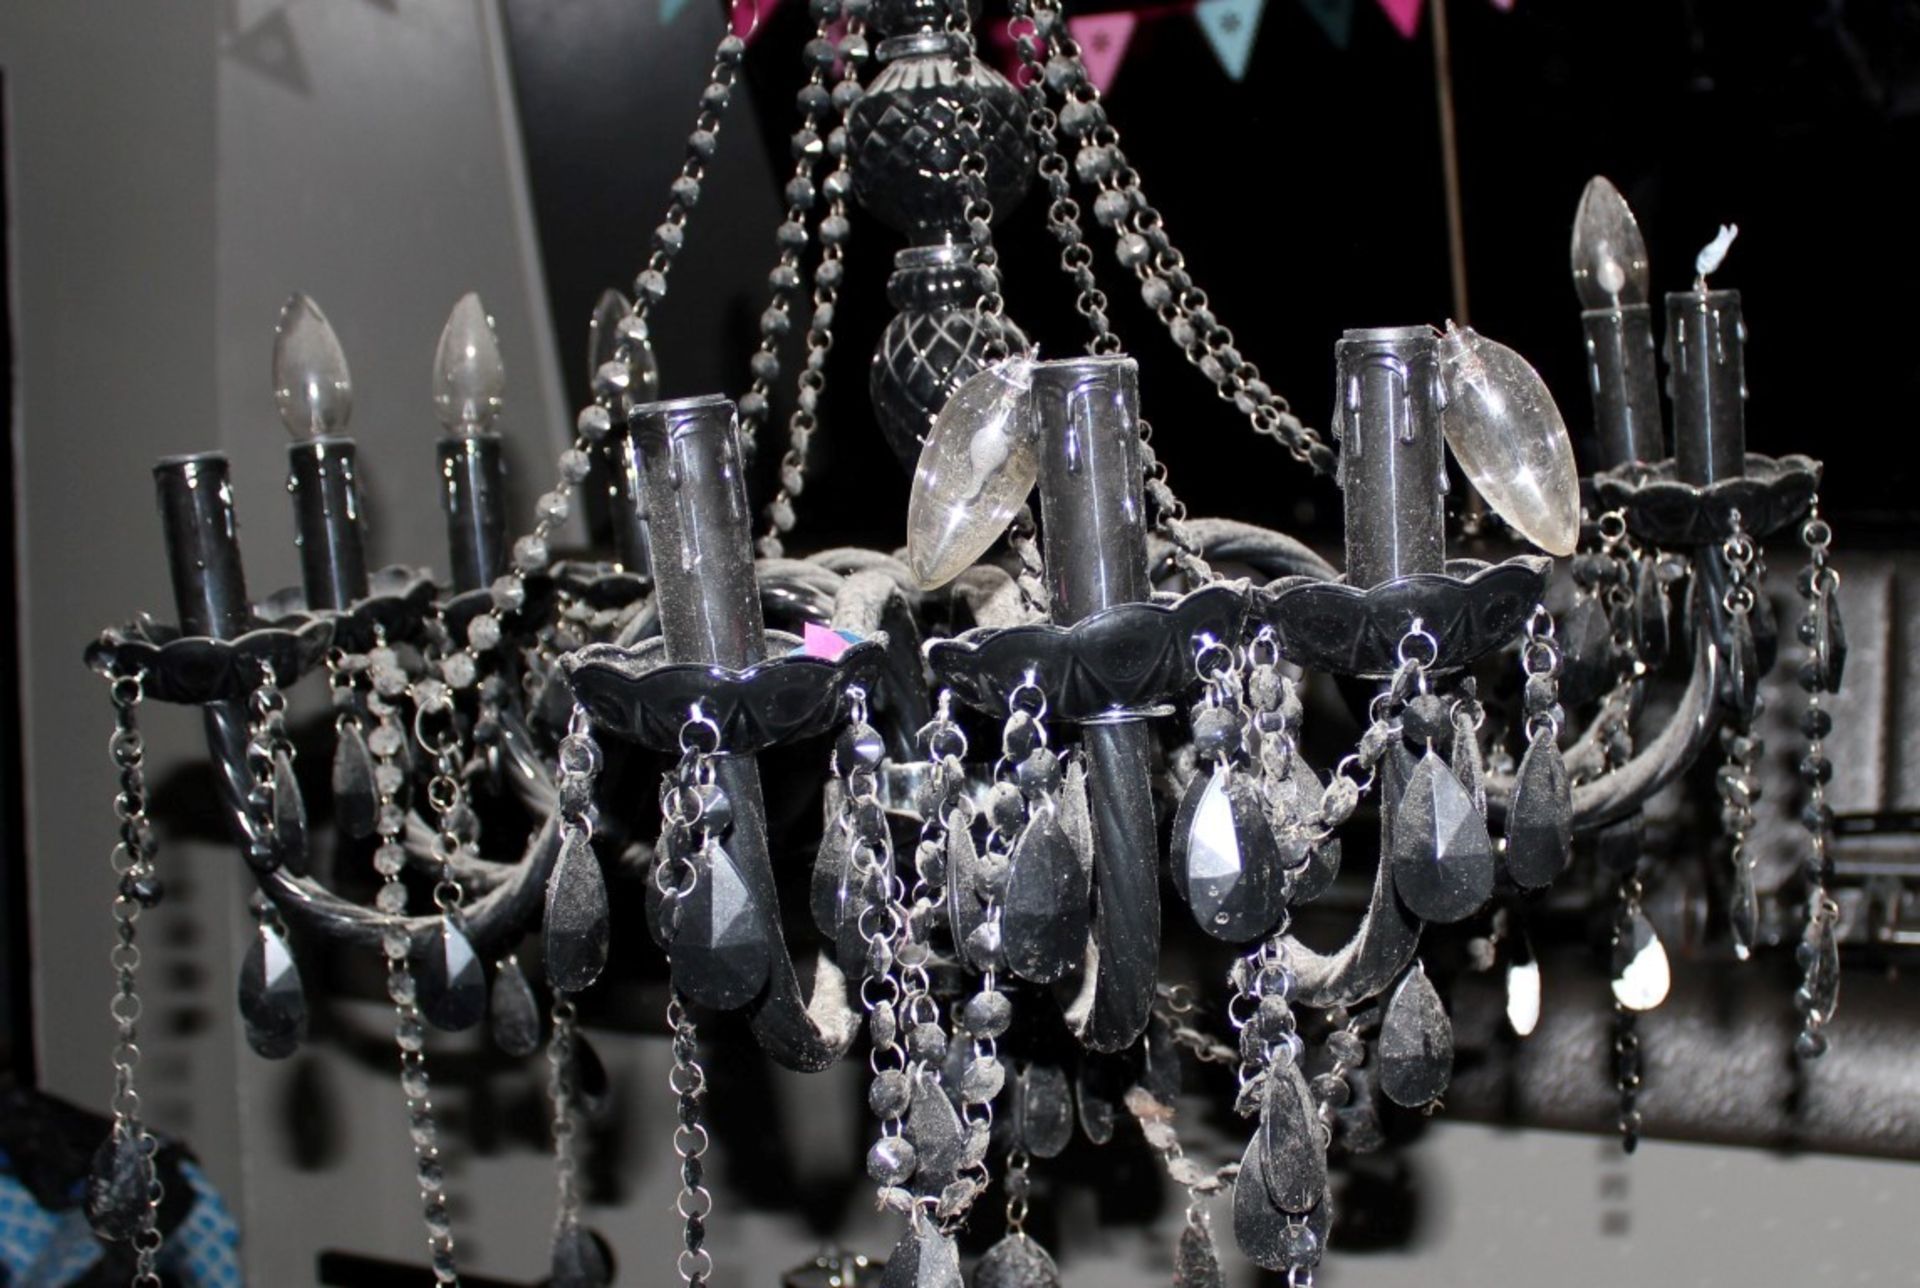 Set of THREE Matching CHANDALIERS Black Gothic Design - CL090 - Ref FBA BL133 - Location: - Image 8 of 8